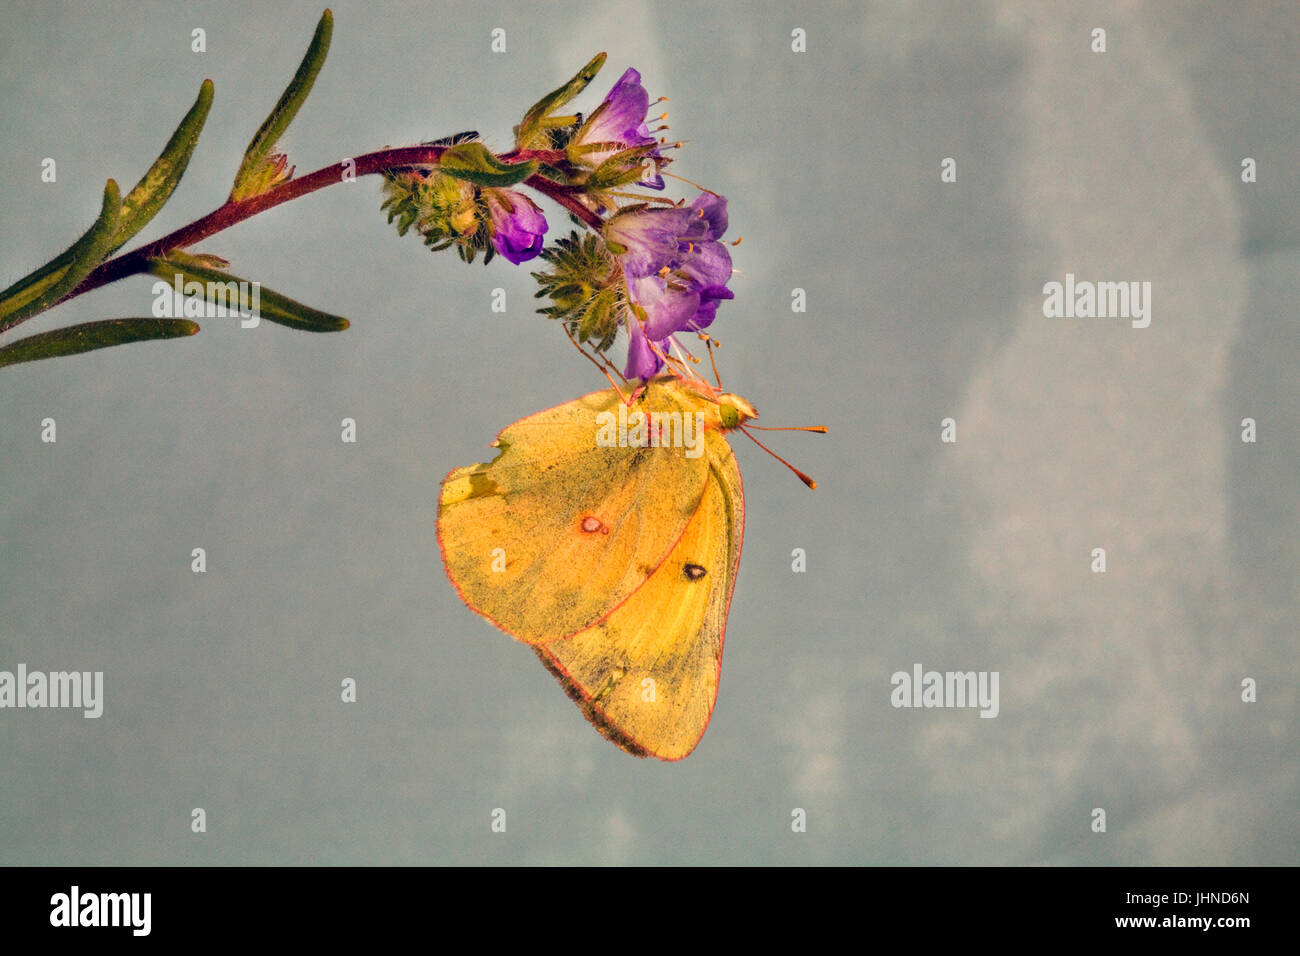 A clouded sulphur butterfly, Colias philodice eriphyle, on a wildflower. Stock Photo